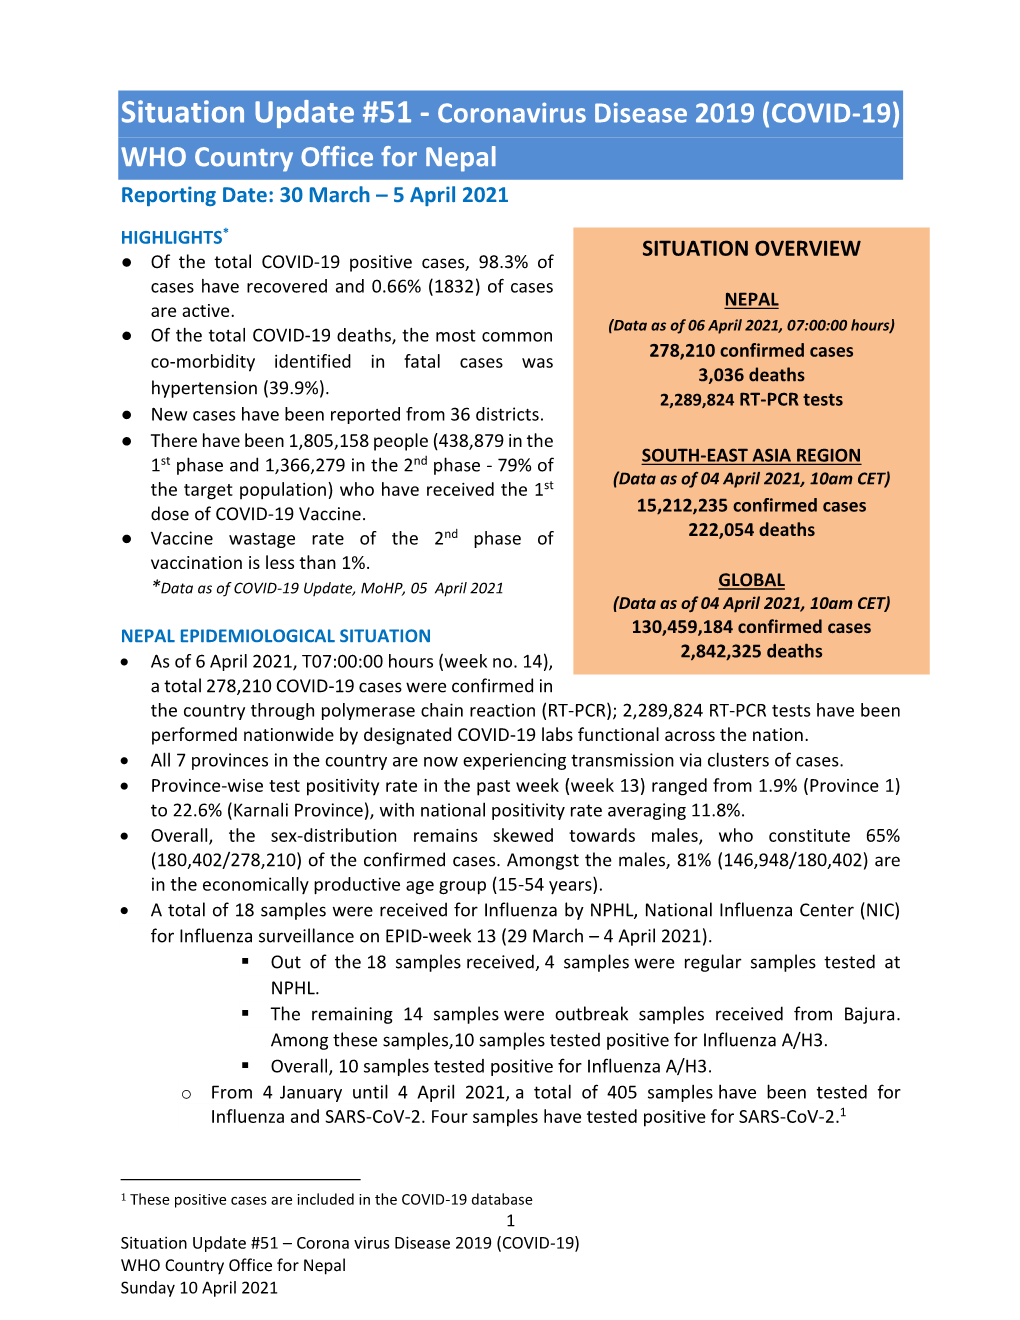 Situation Update #51 - Coronavirus Disease 2019 (COVID-19) WHO Country Office for Nepal Reporting Date: 30 March – 5 April 2021